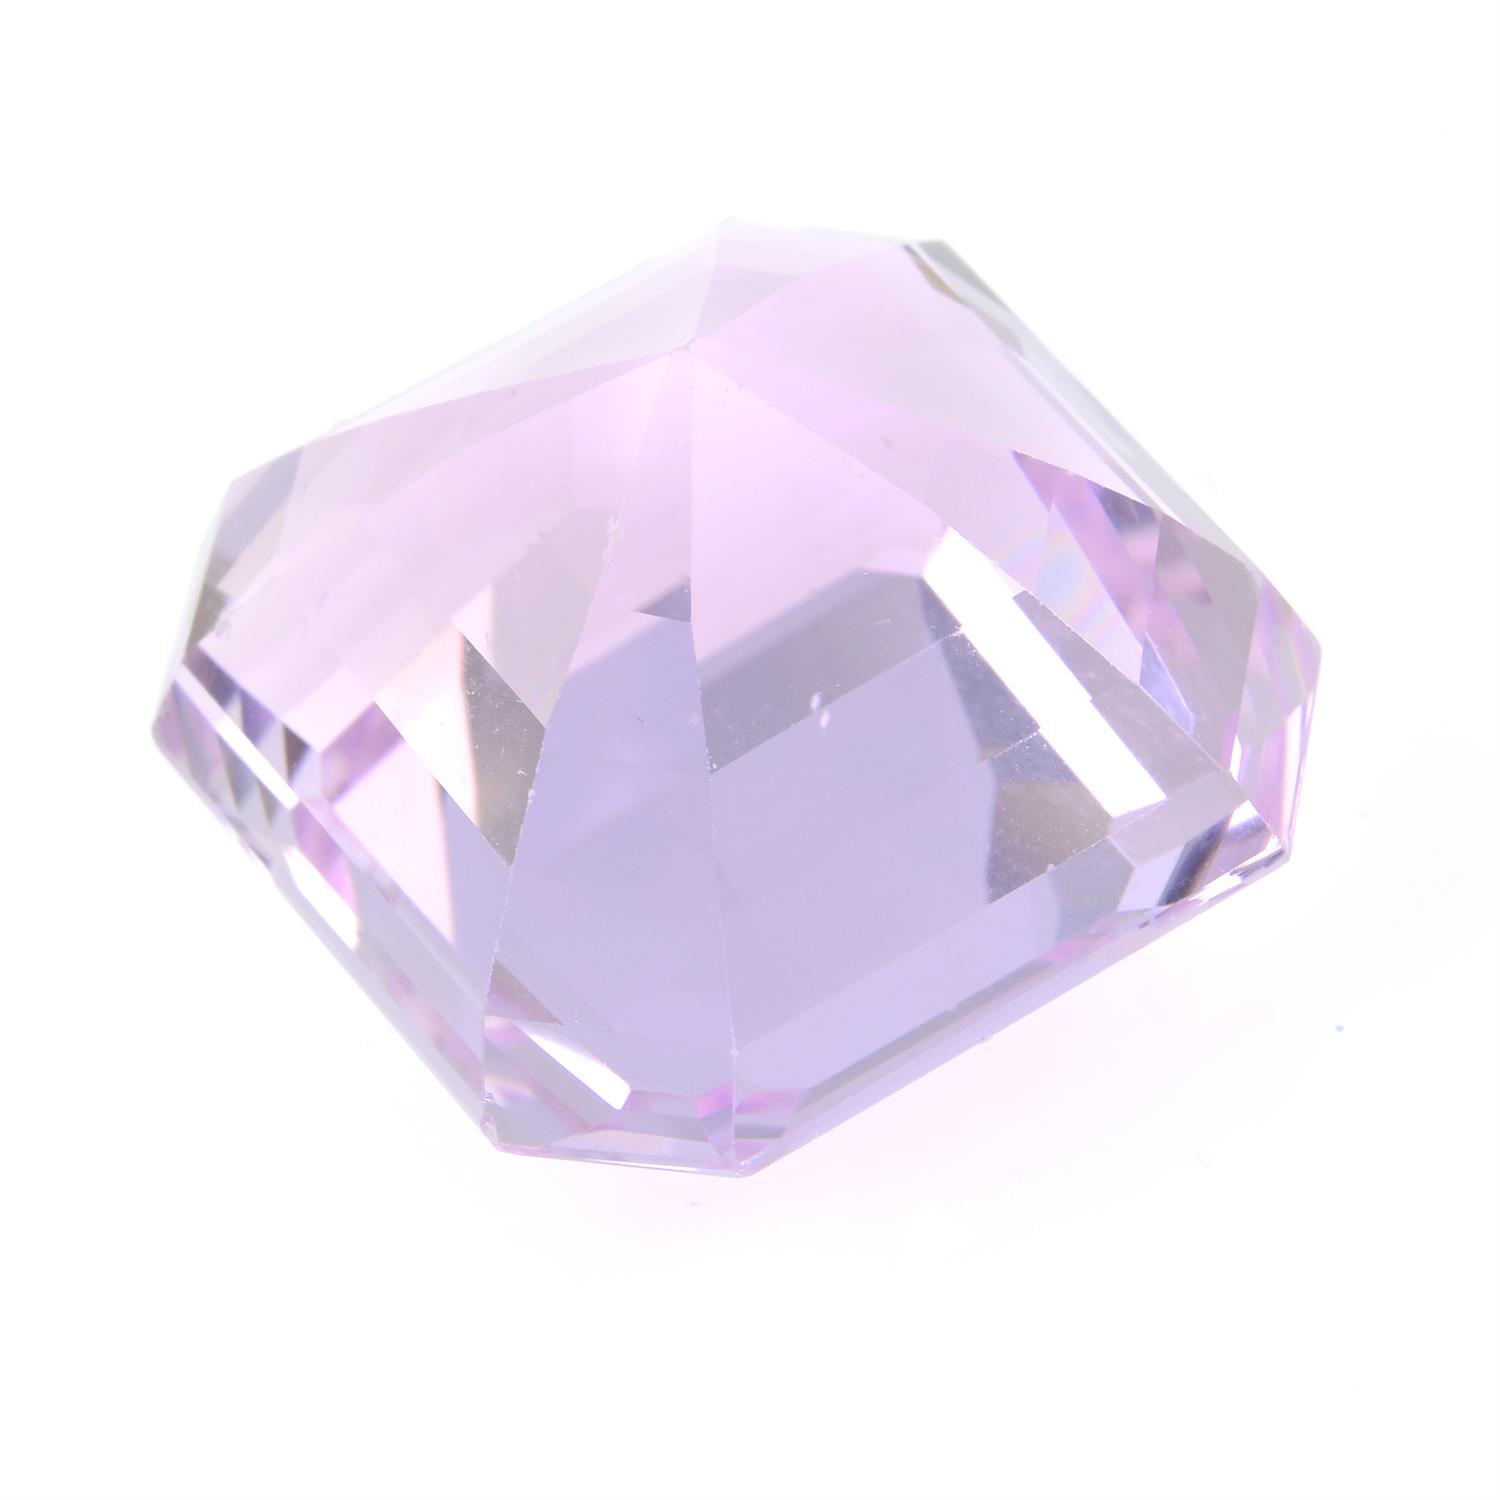 A square-shape kunzite, weight 52.87cts. - Image 2 of 2